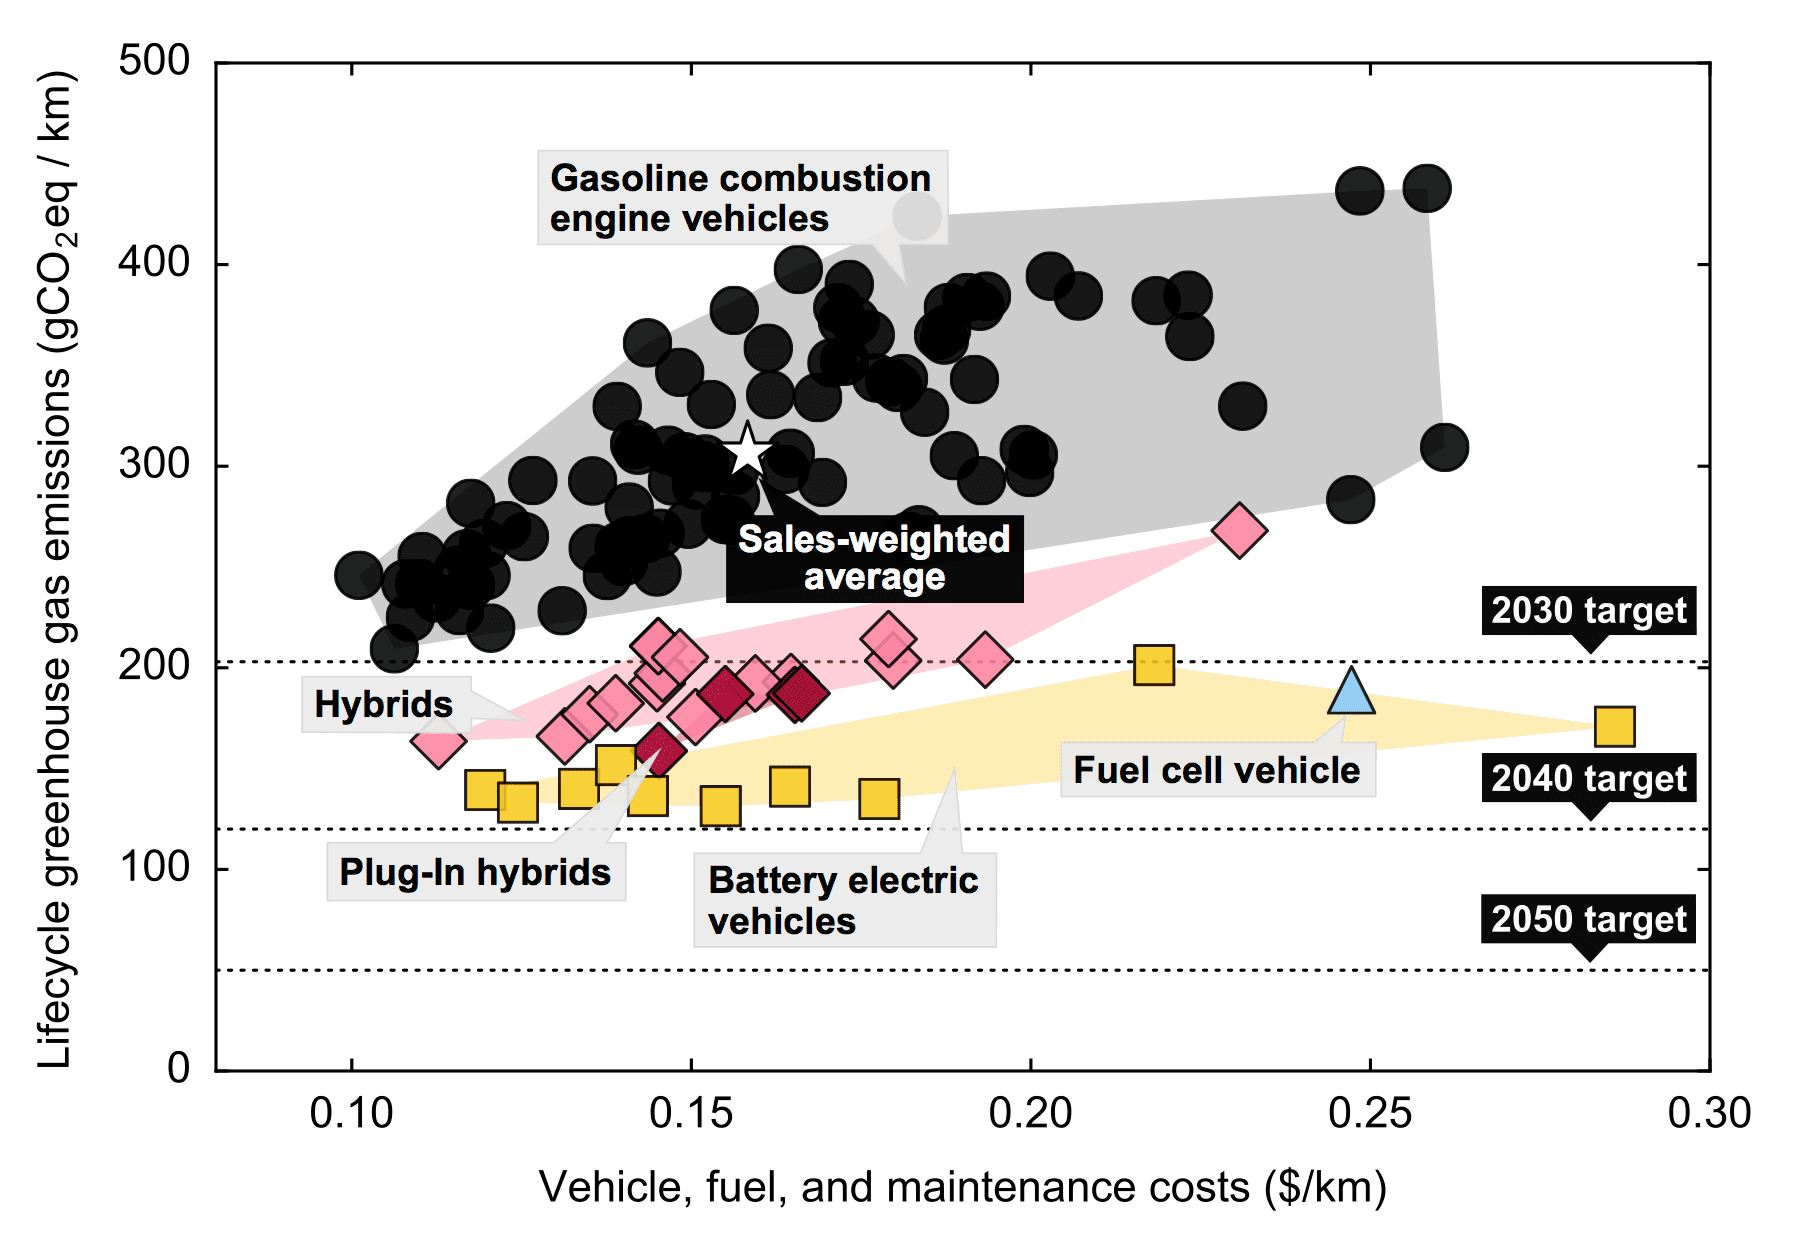 A charts estimating costs and lifetime emissions of 125 popular cars against climate goals.